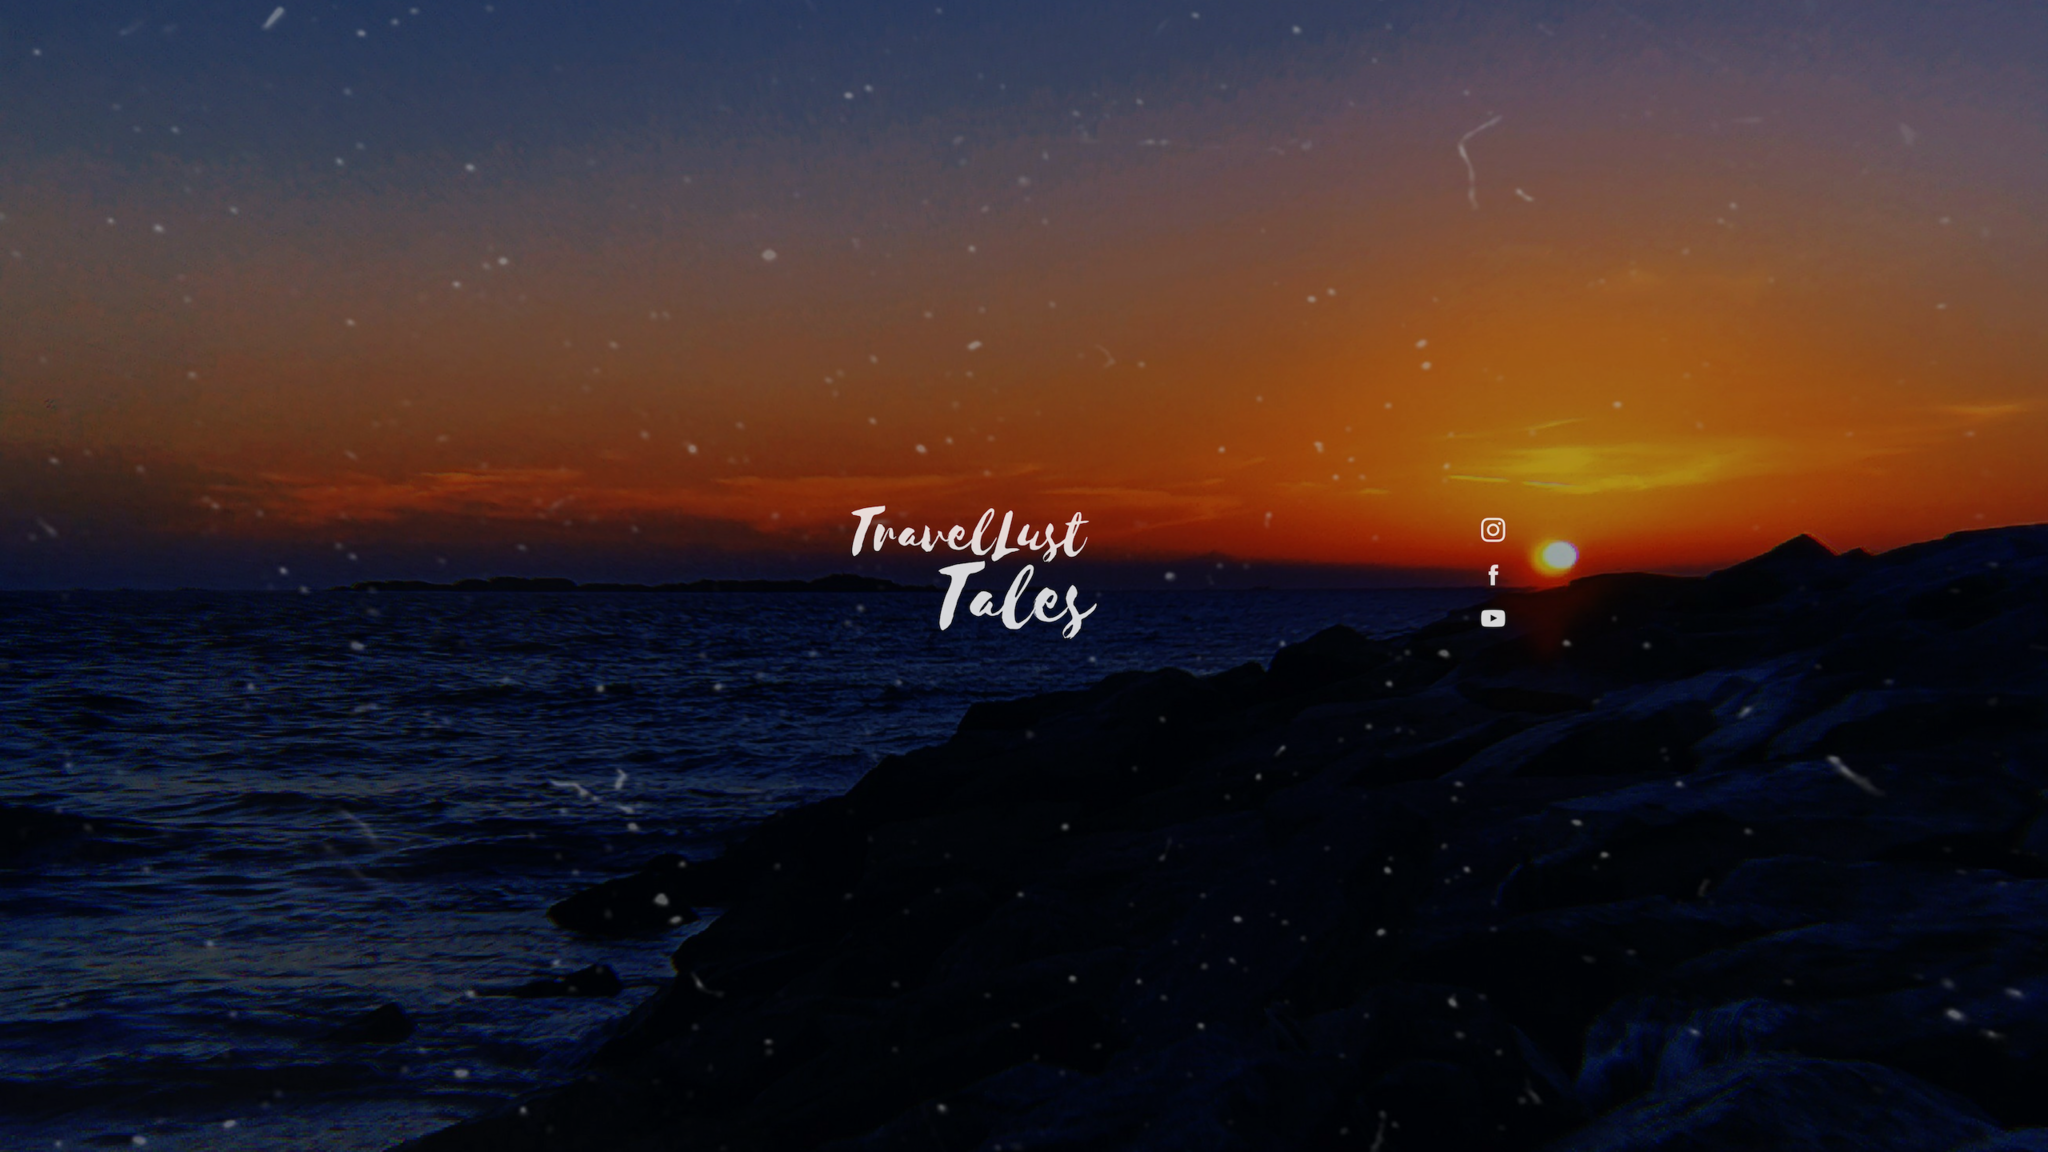 Cover Image of TravelLust Tales